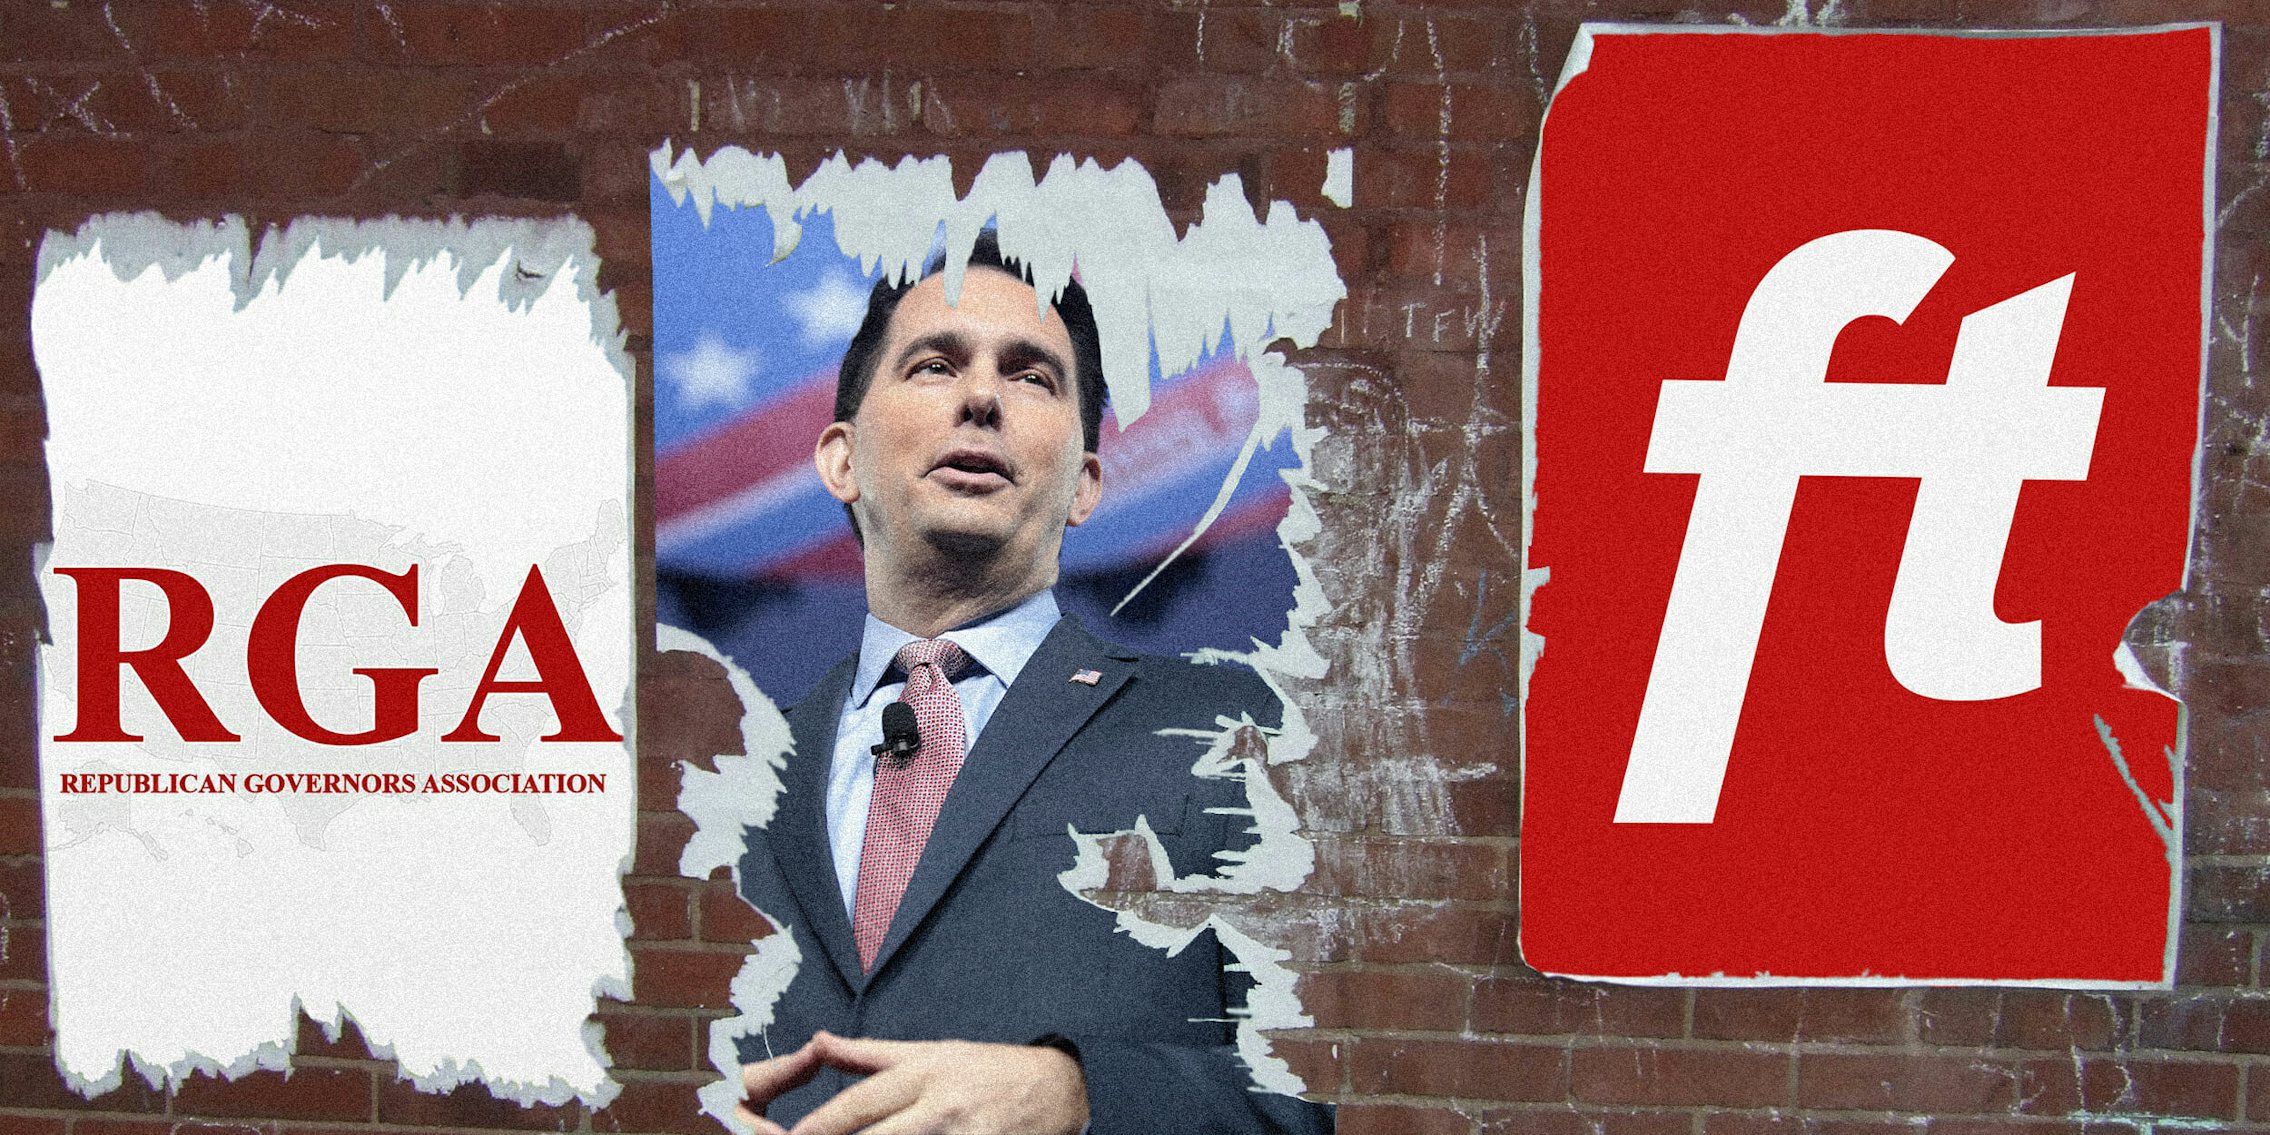 Republican Governors Association, Scott Walker, and Free Telegraph logo posters on brick wall